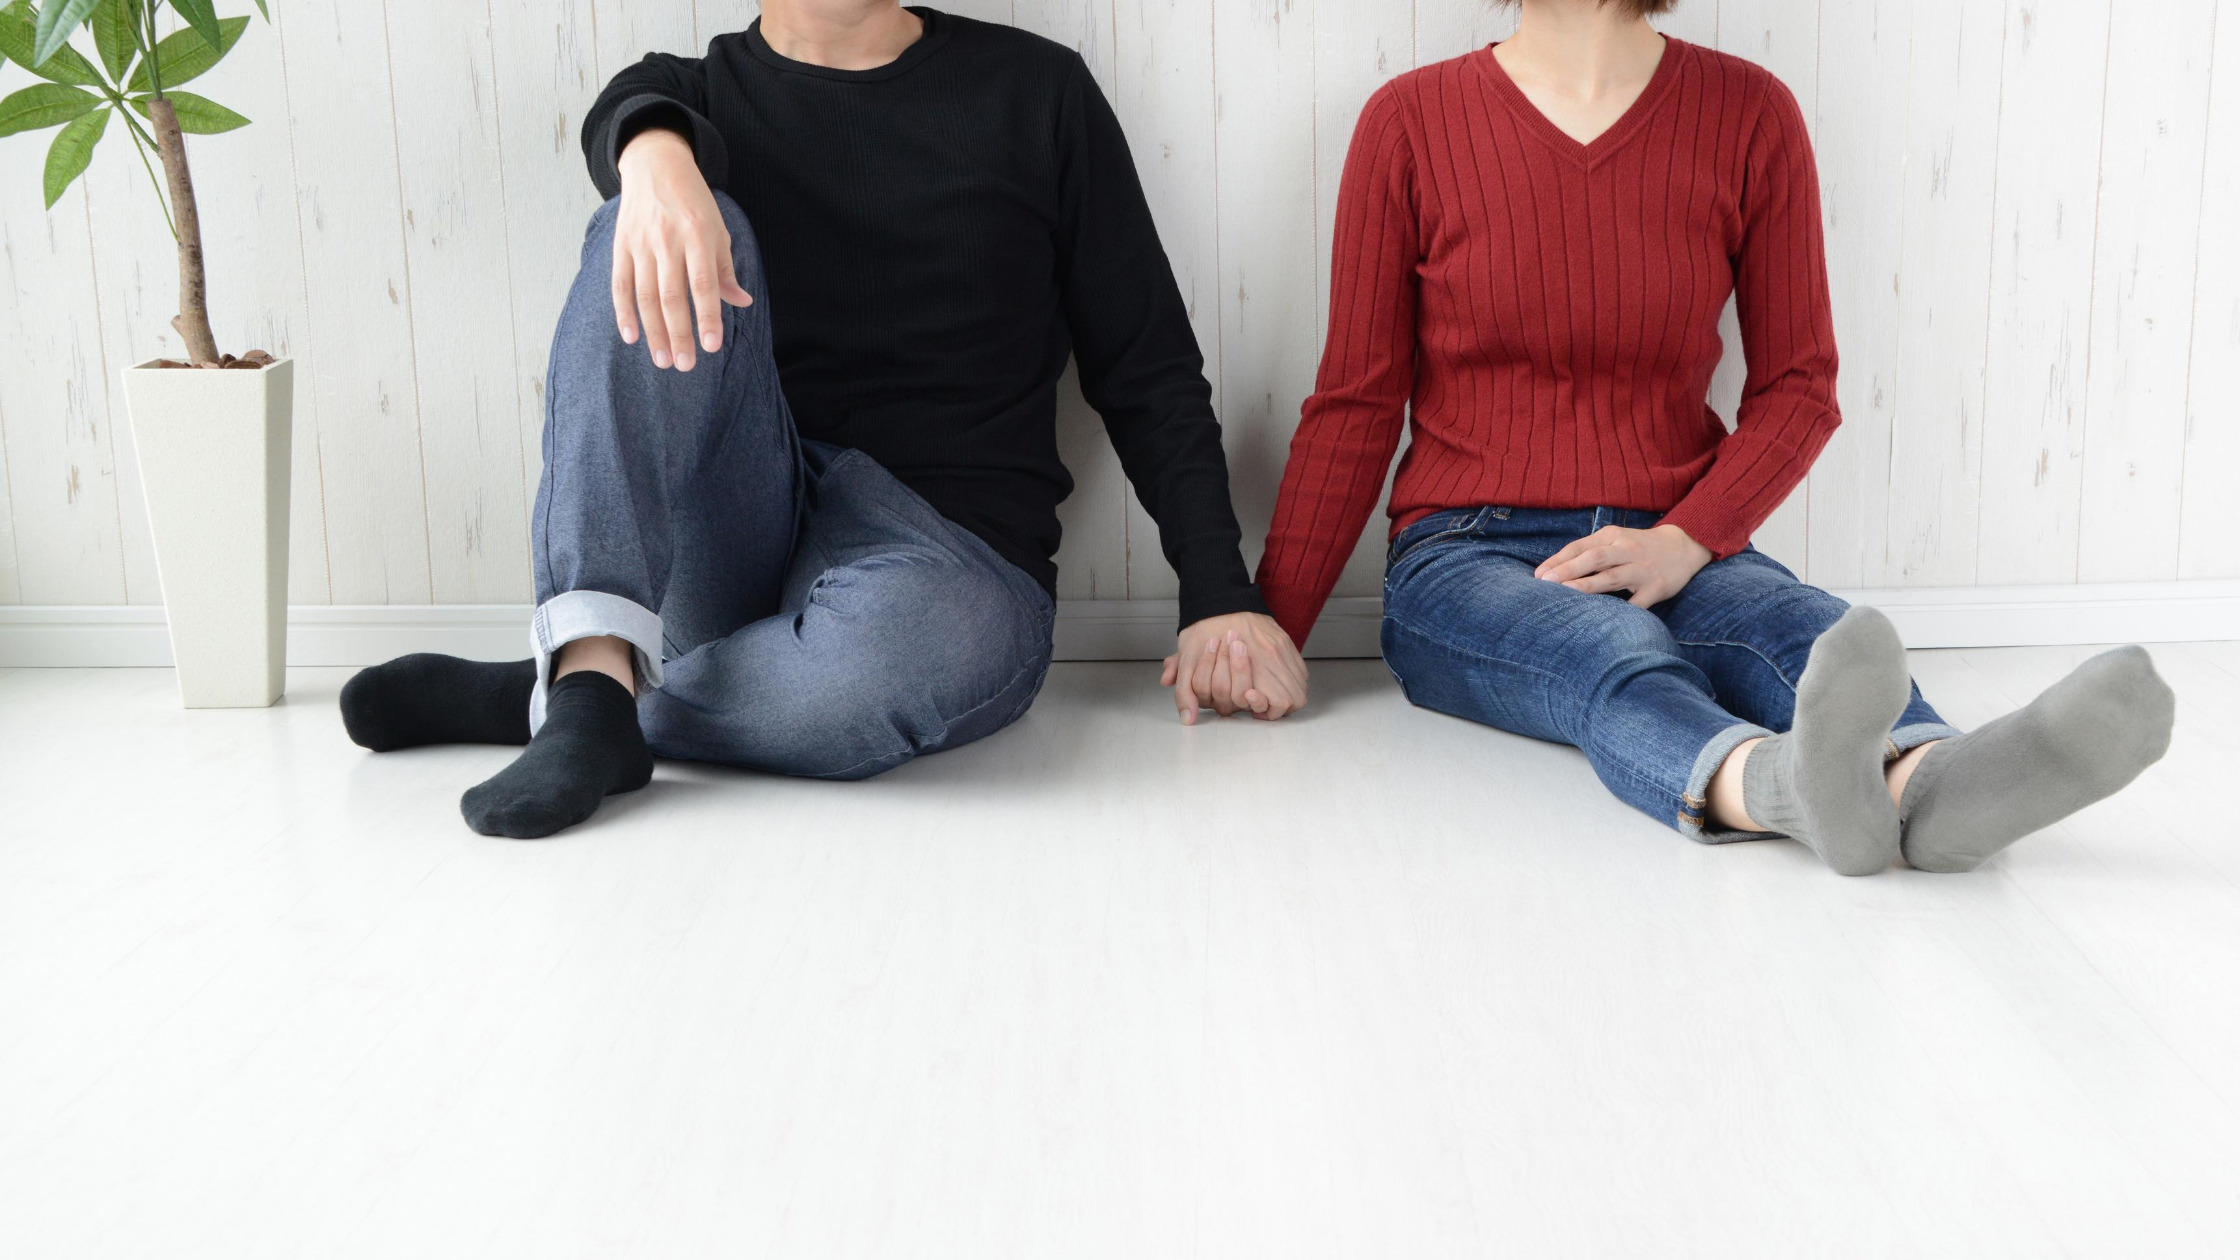 Relationship Counseling, Greensboro Relationship Counseling, Marriage Counseling, Relationship Therapy, Premarital Counseling, Relationships During COVID, Relationships During Coronavirus, Marriage Therapy, Couples Therapy, Couples Counseling